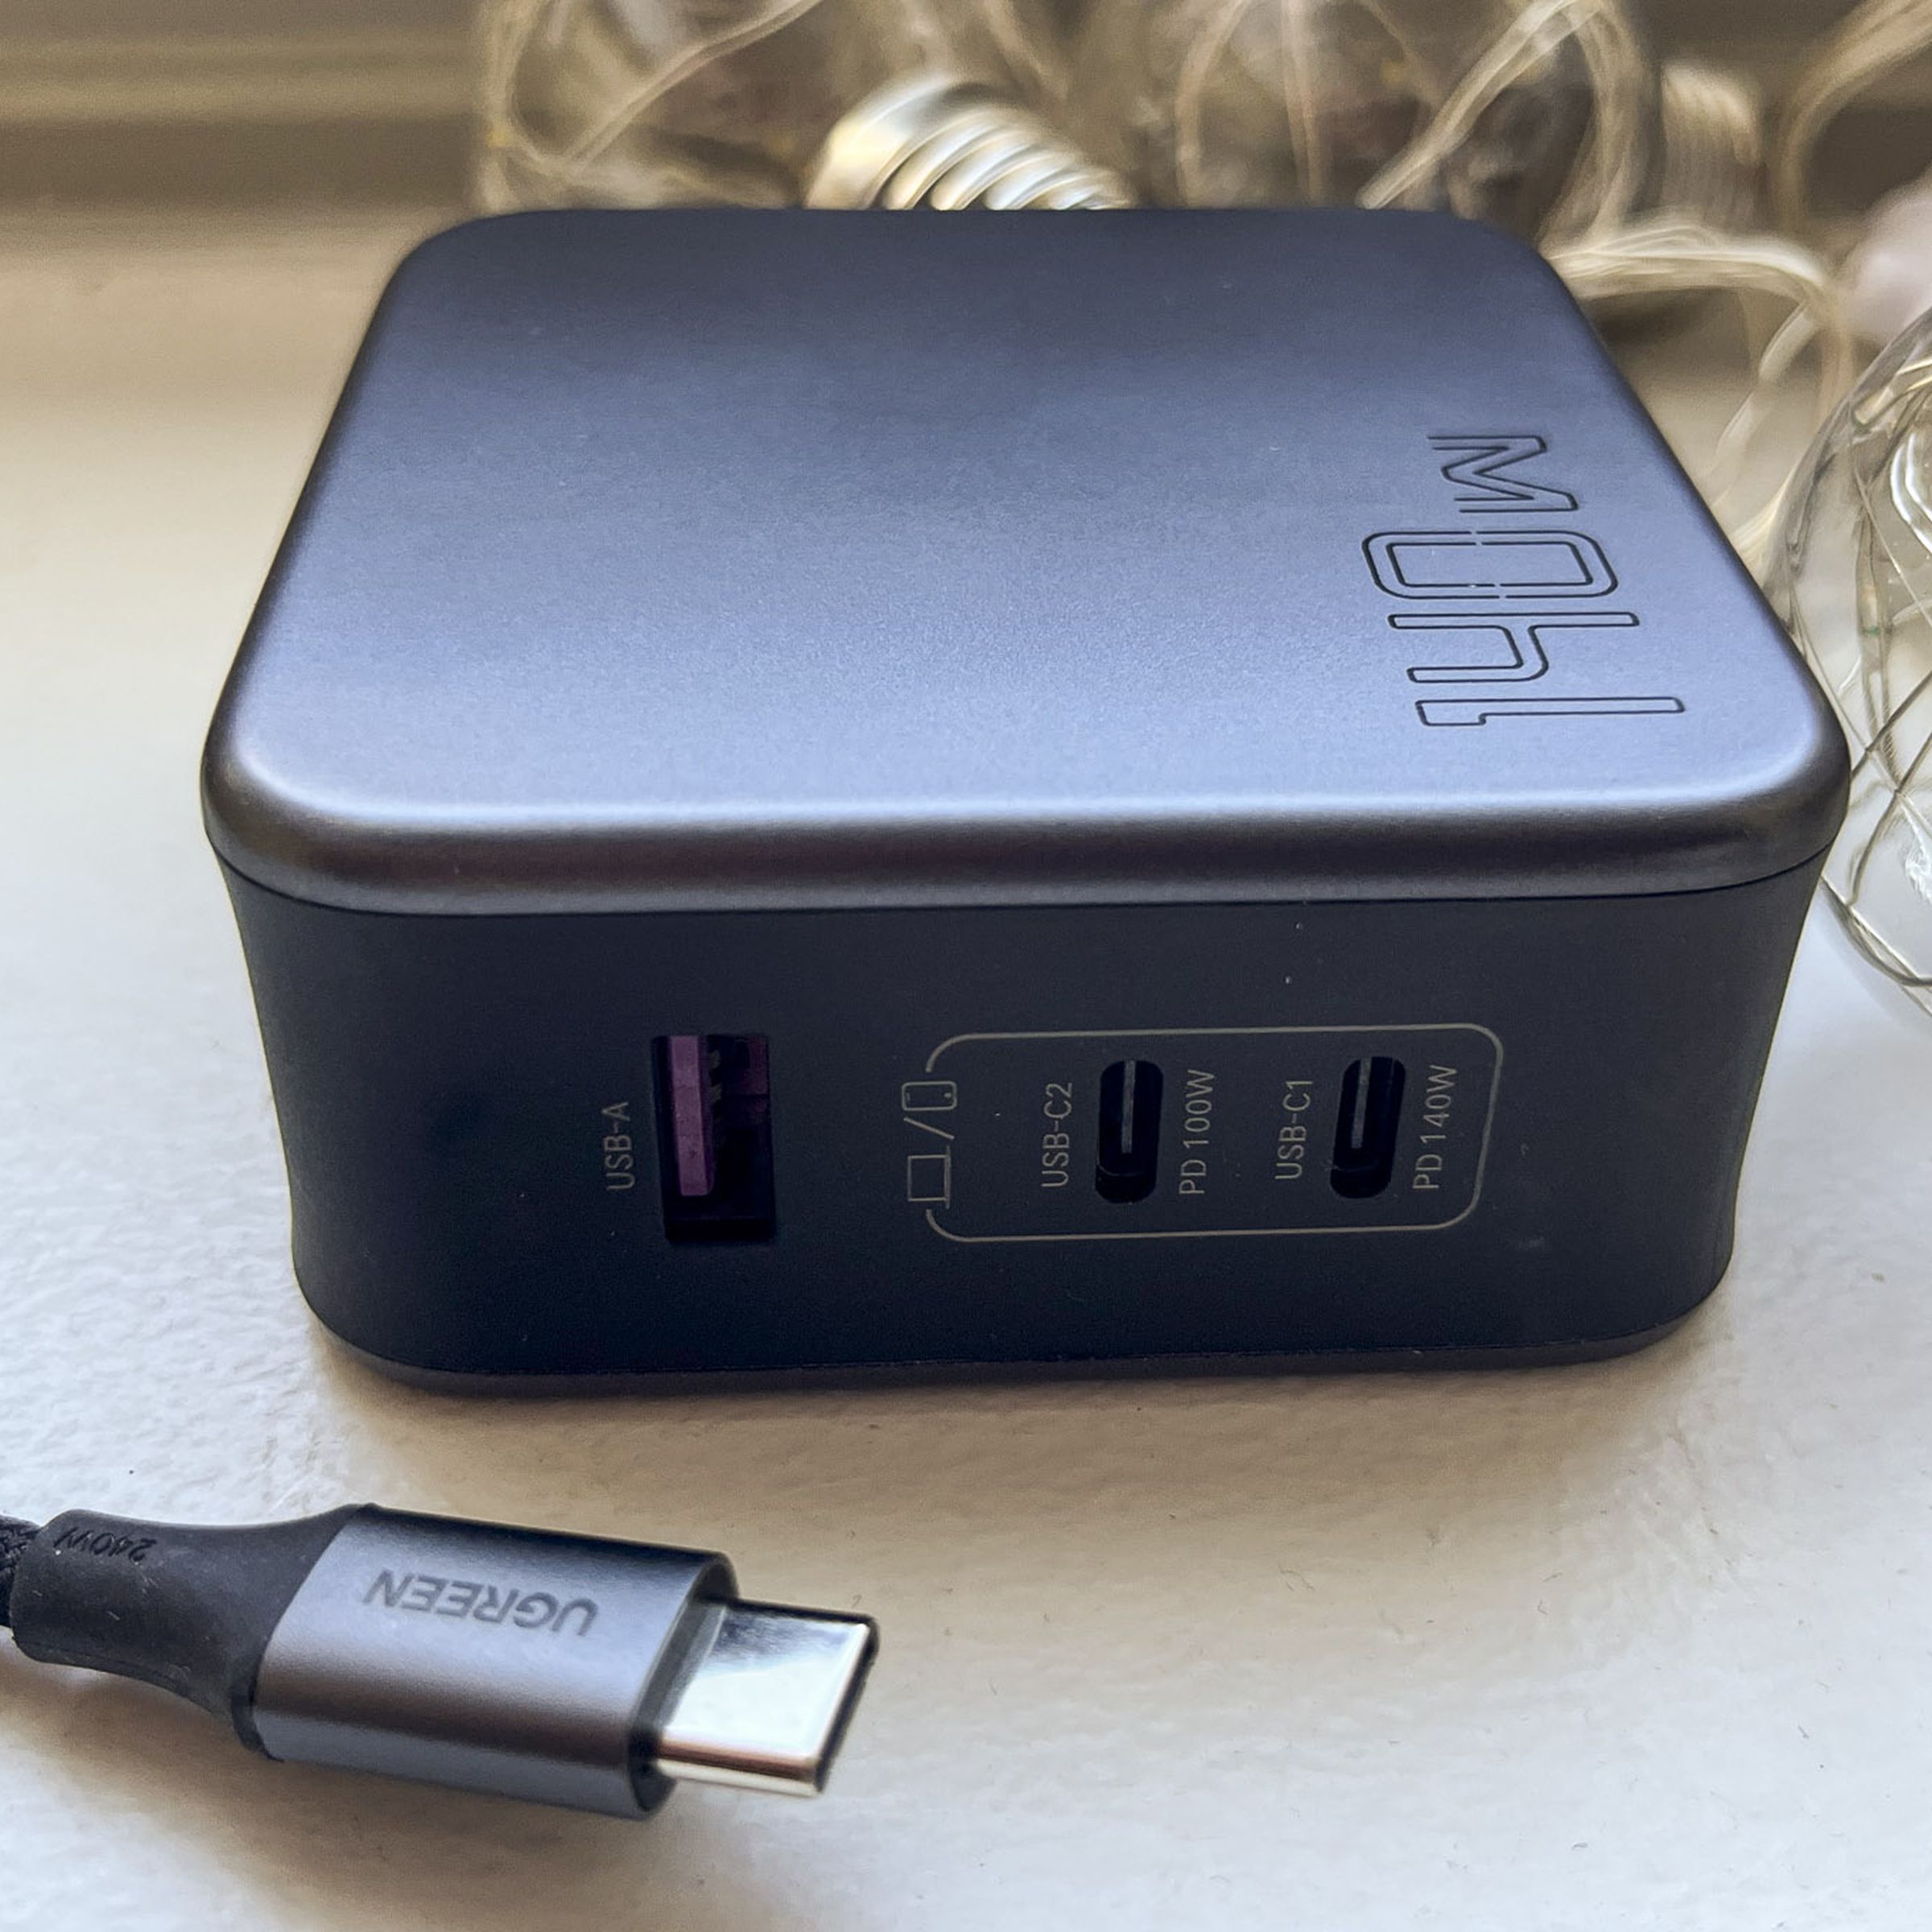 Ugreen’s Nexode charger is a gray brick on its side on a white window sill. 140W is printed on the top, string light retro bulbs sit behind it, and a braided black USB-C cable with Ugreen is printed on the tip. The charger has two USB-C ports and one USB-A port.